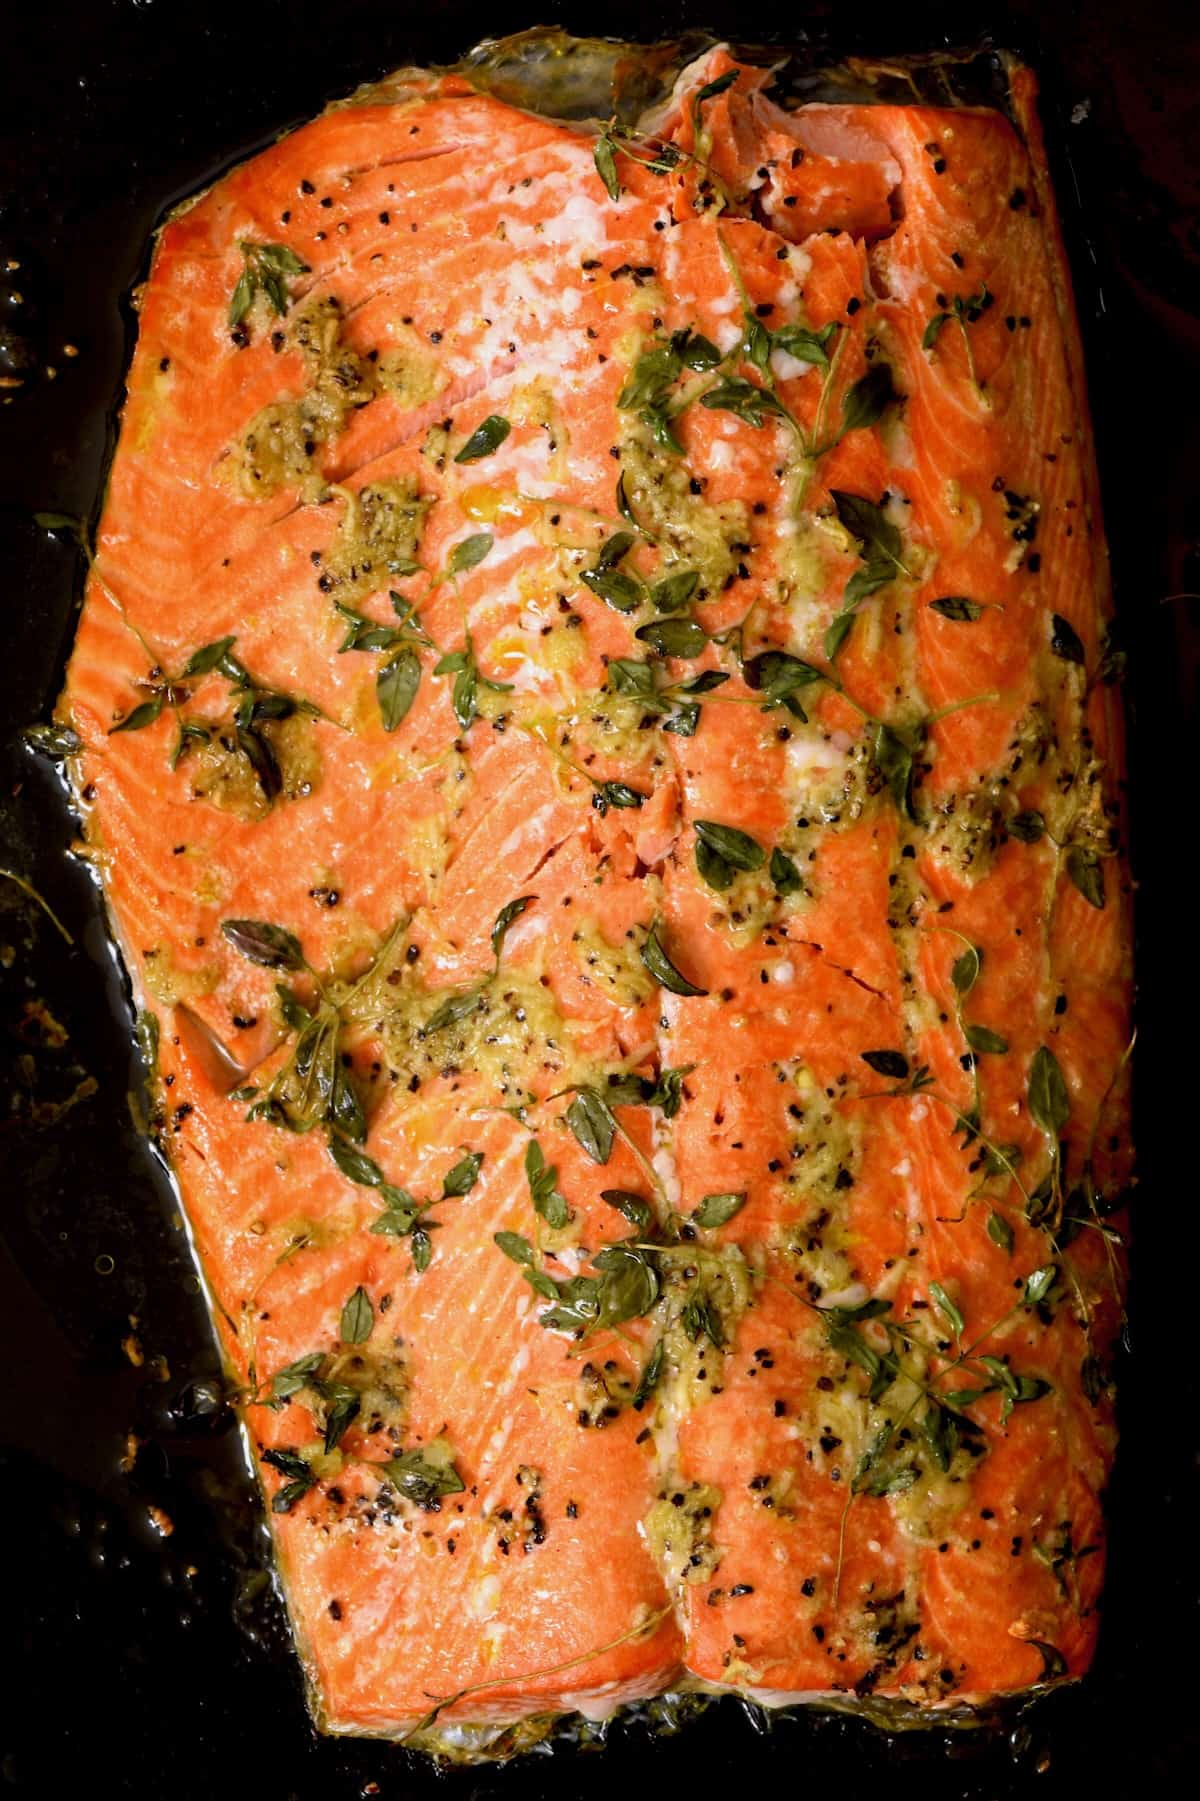 Oven baked salmon filet on a tray